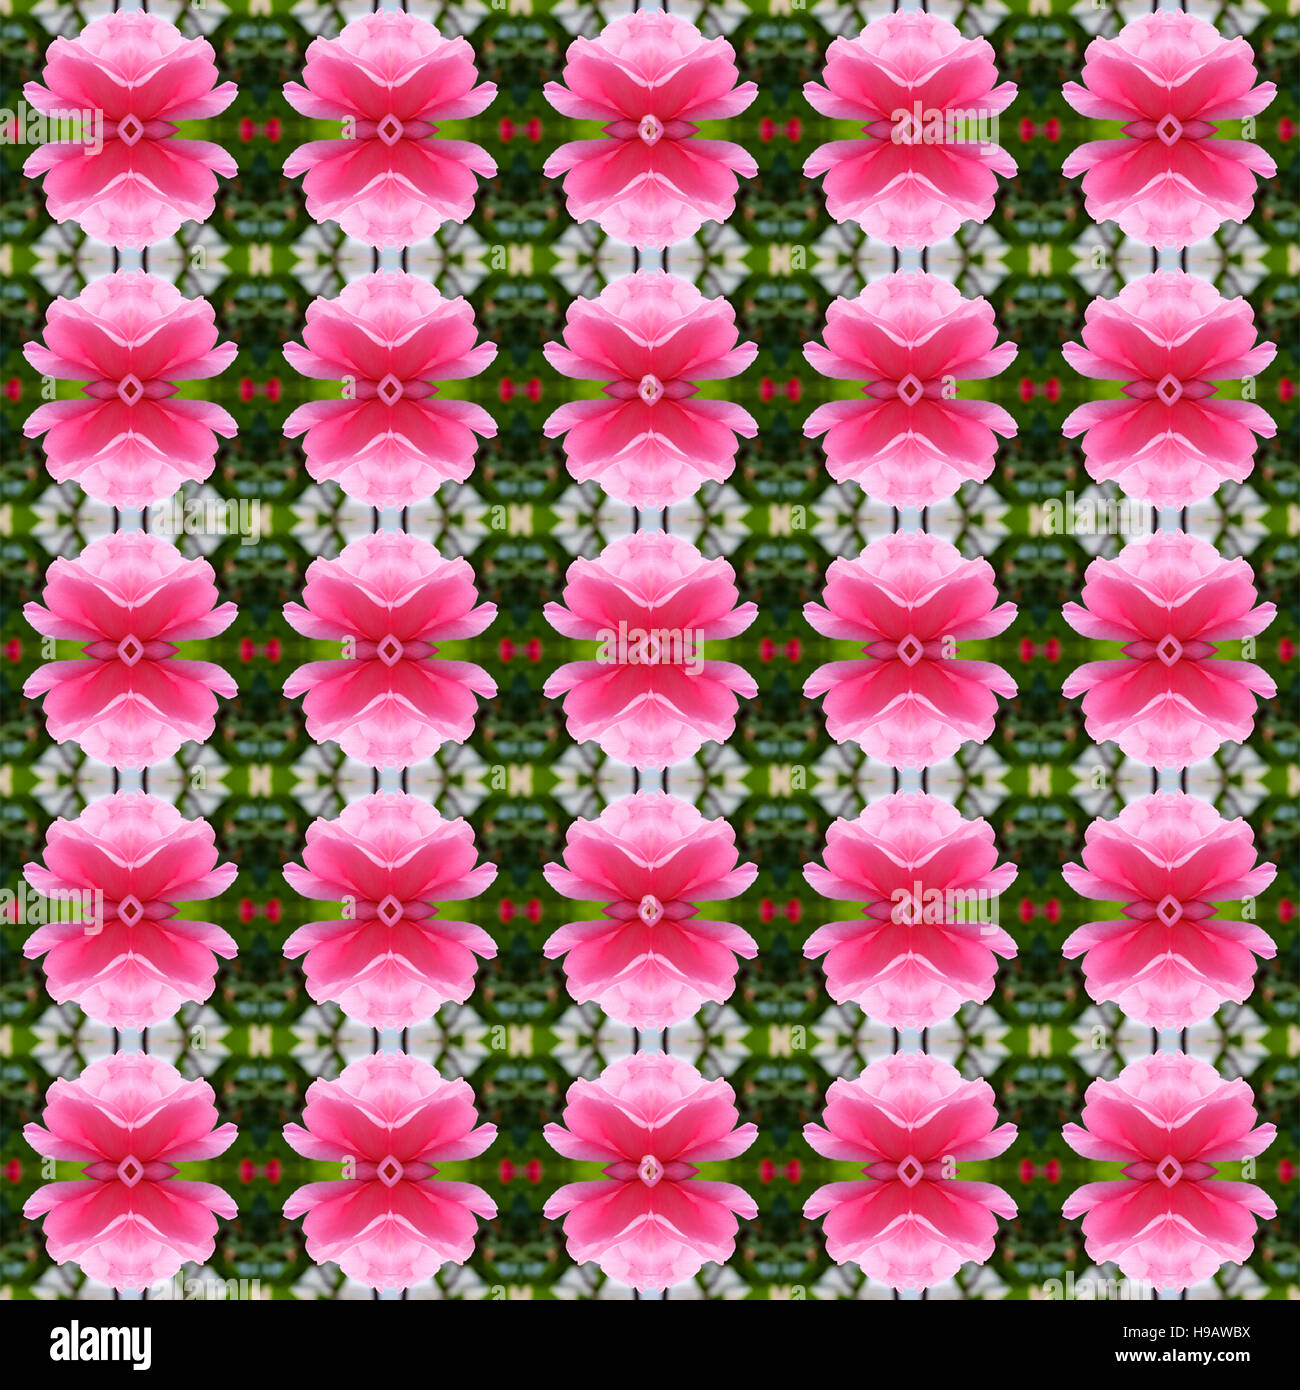 Green and pink abstract seamless pattern Stock Photo